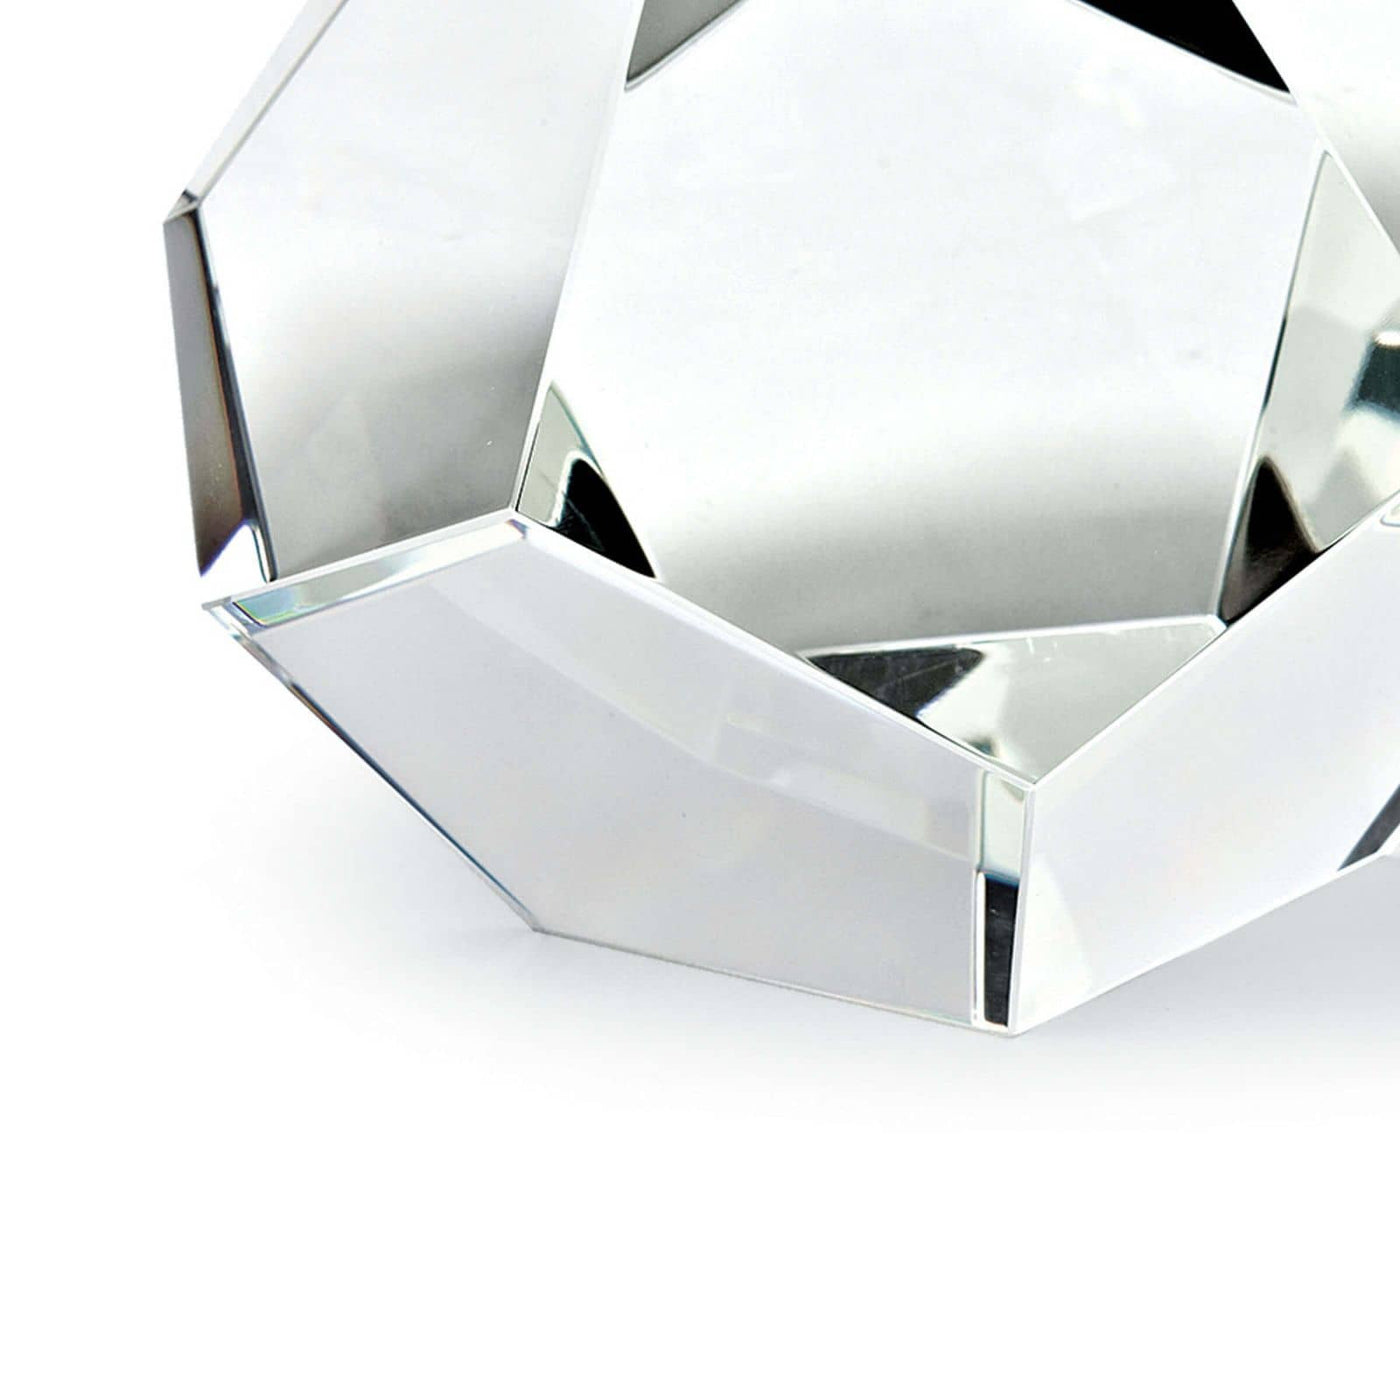 SCULPTURE CRYSTAL DODECAHEDRON SMALL